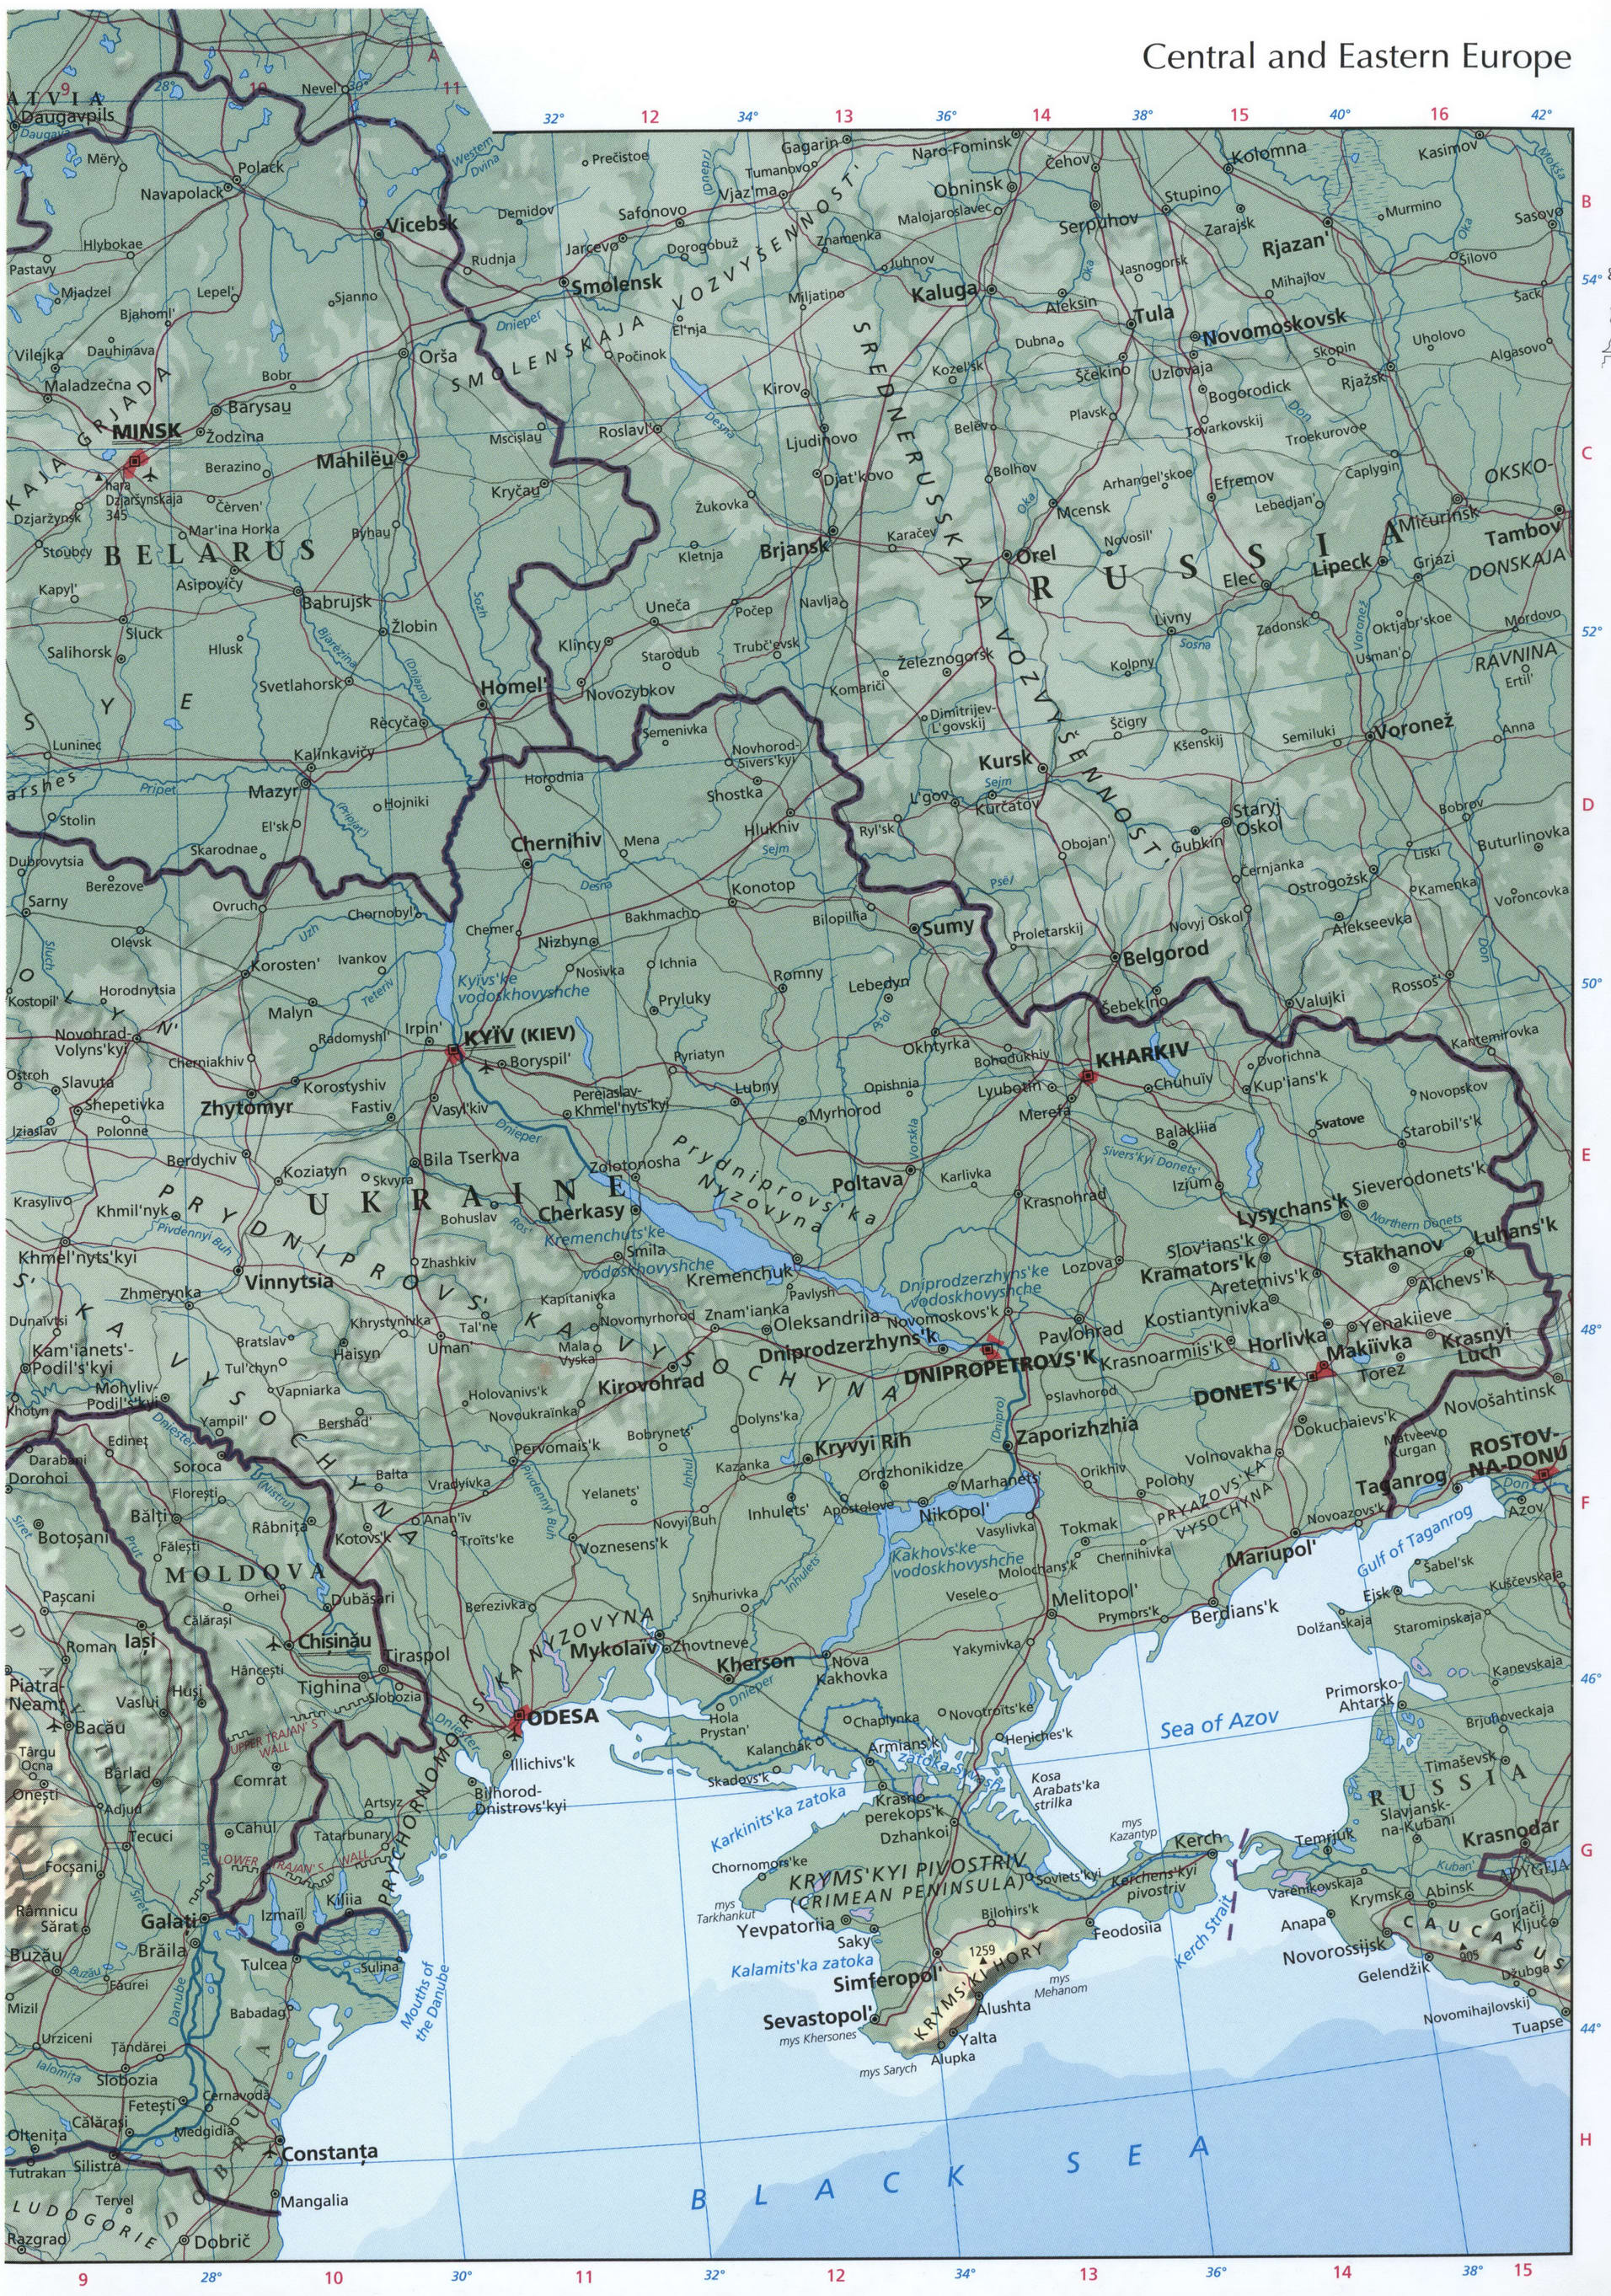 Central and Eastern Europe map